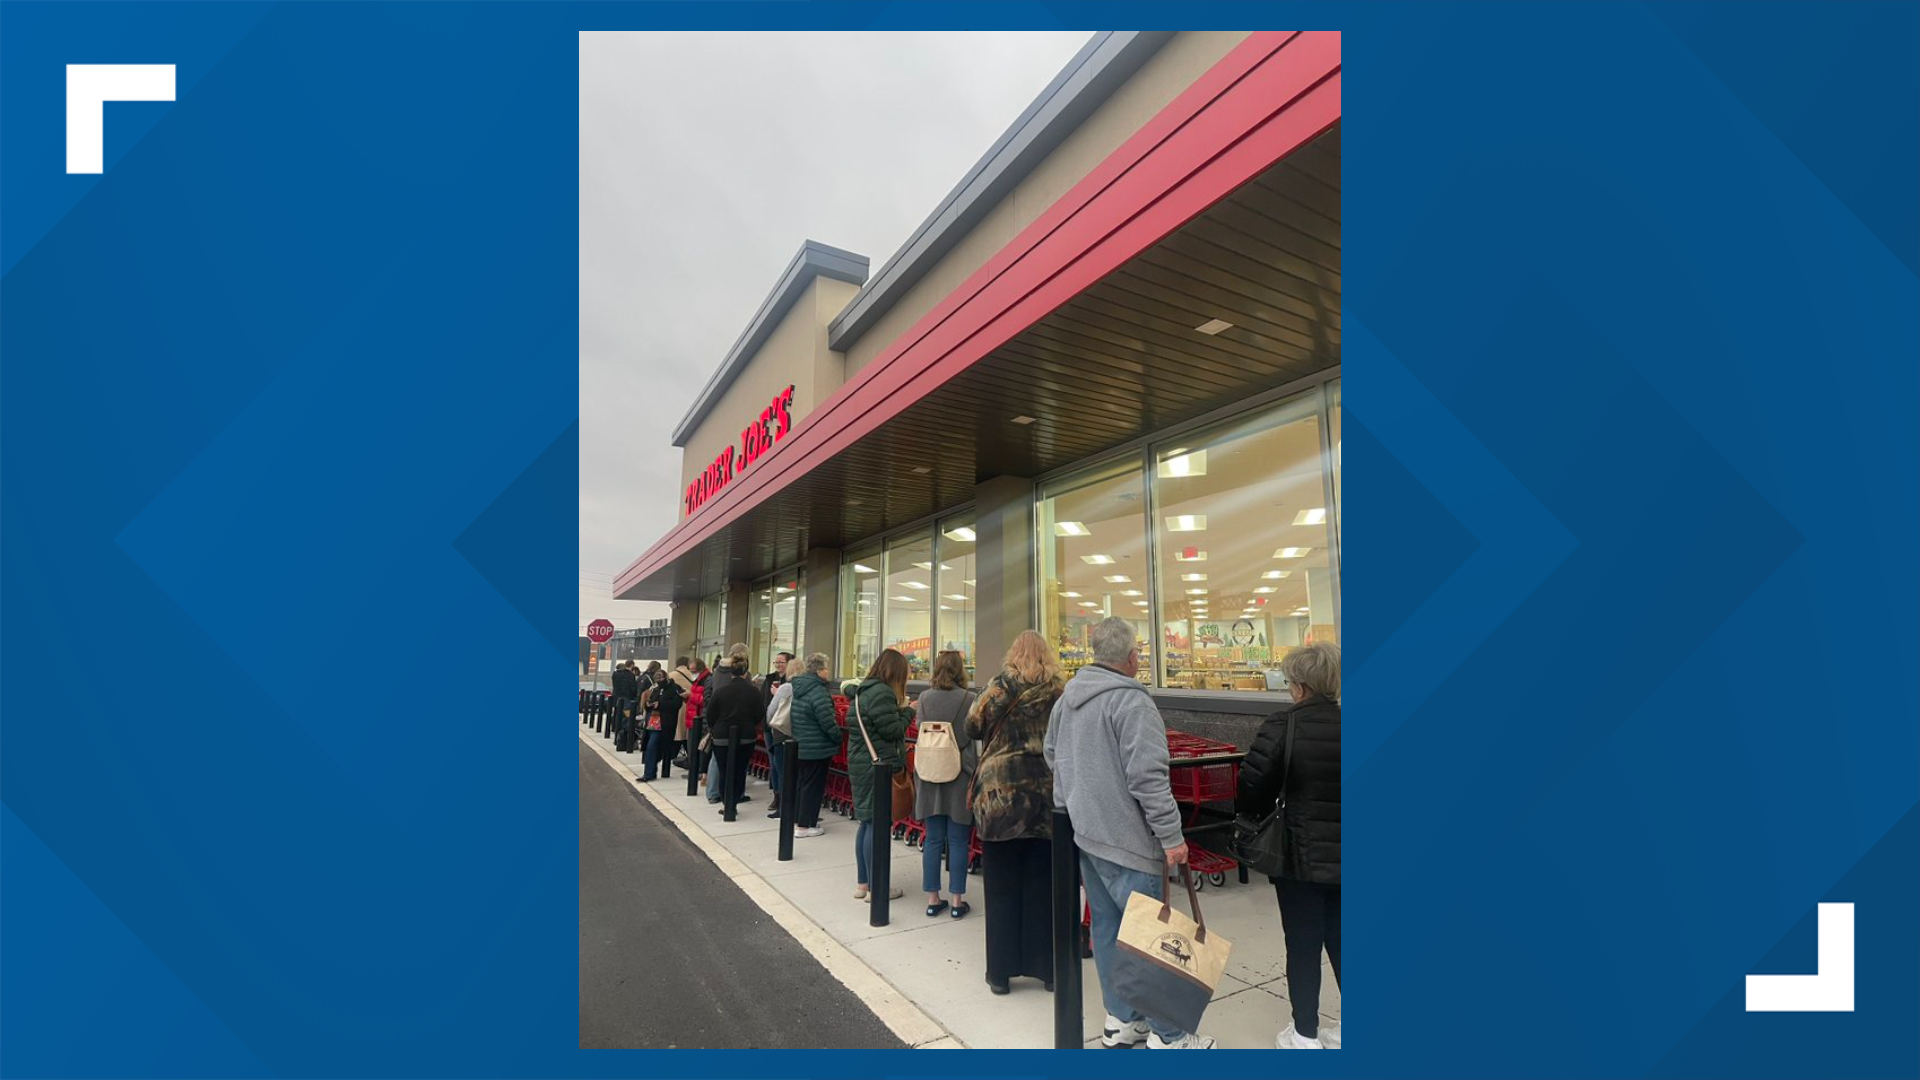 The first Trader Joe's in Central Pennsylvania opened its doors on Thursday morning.